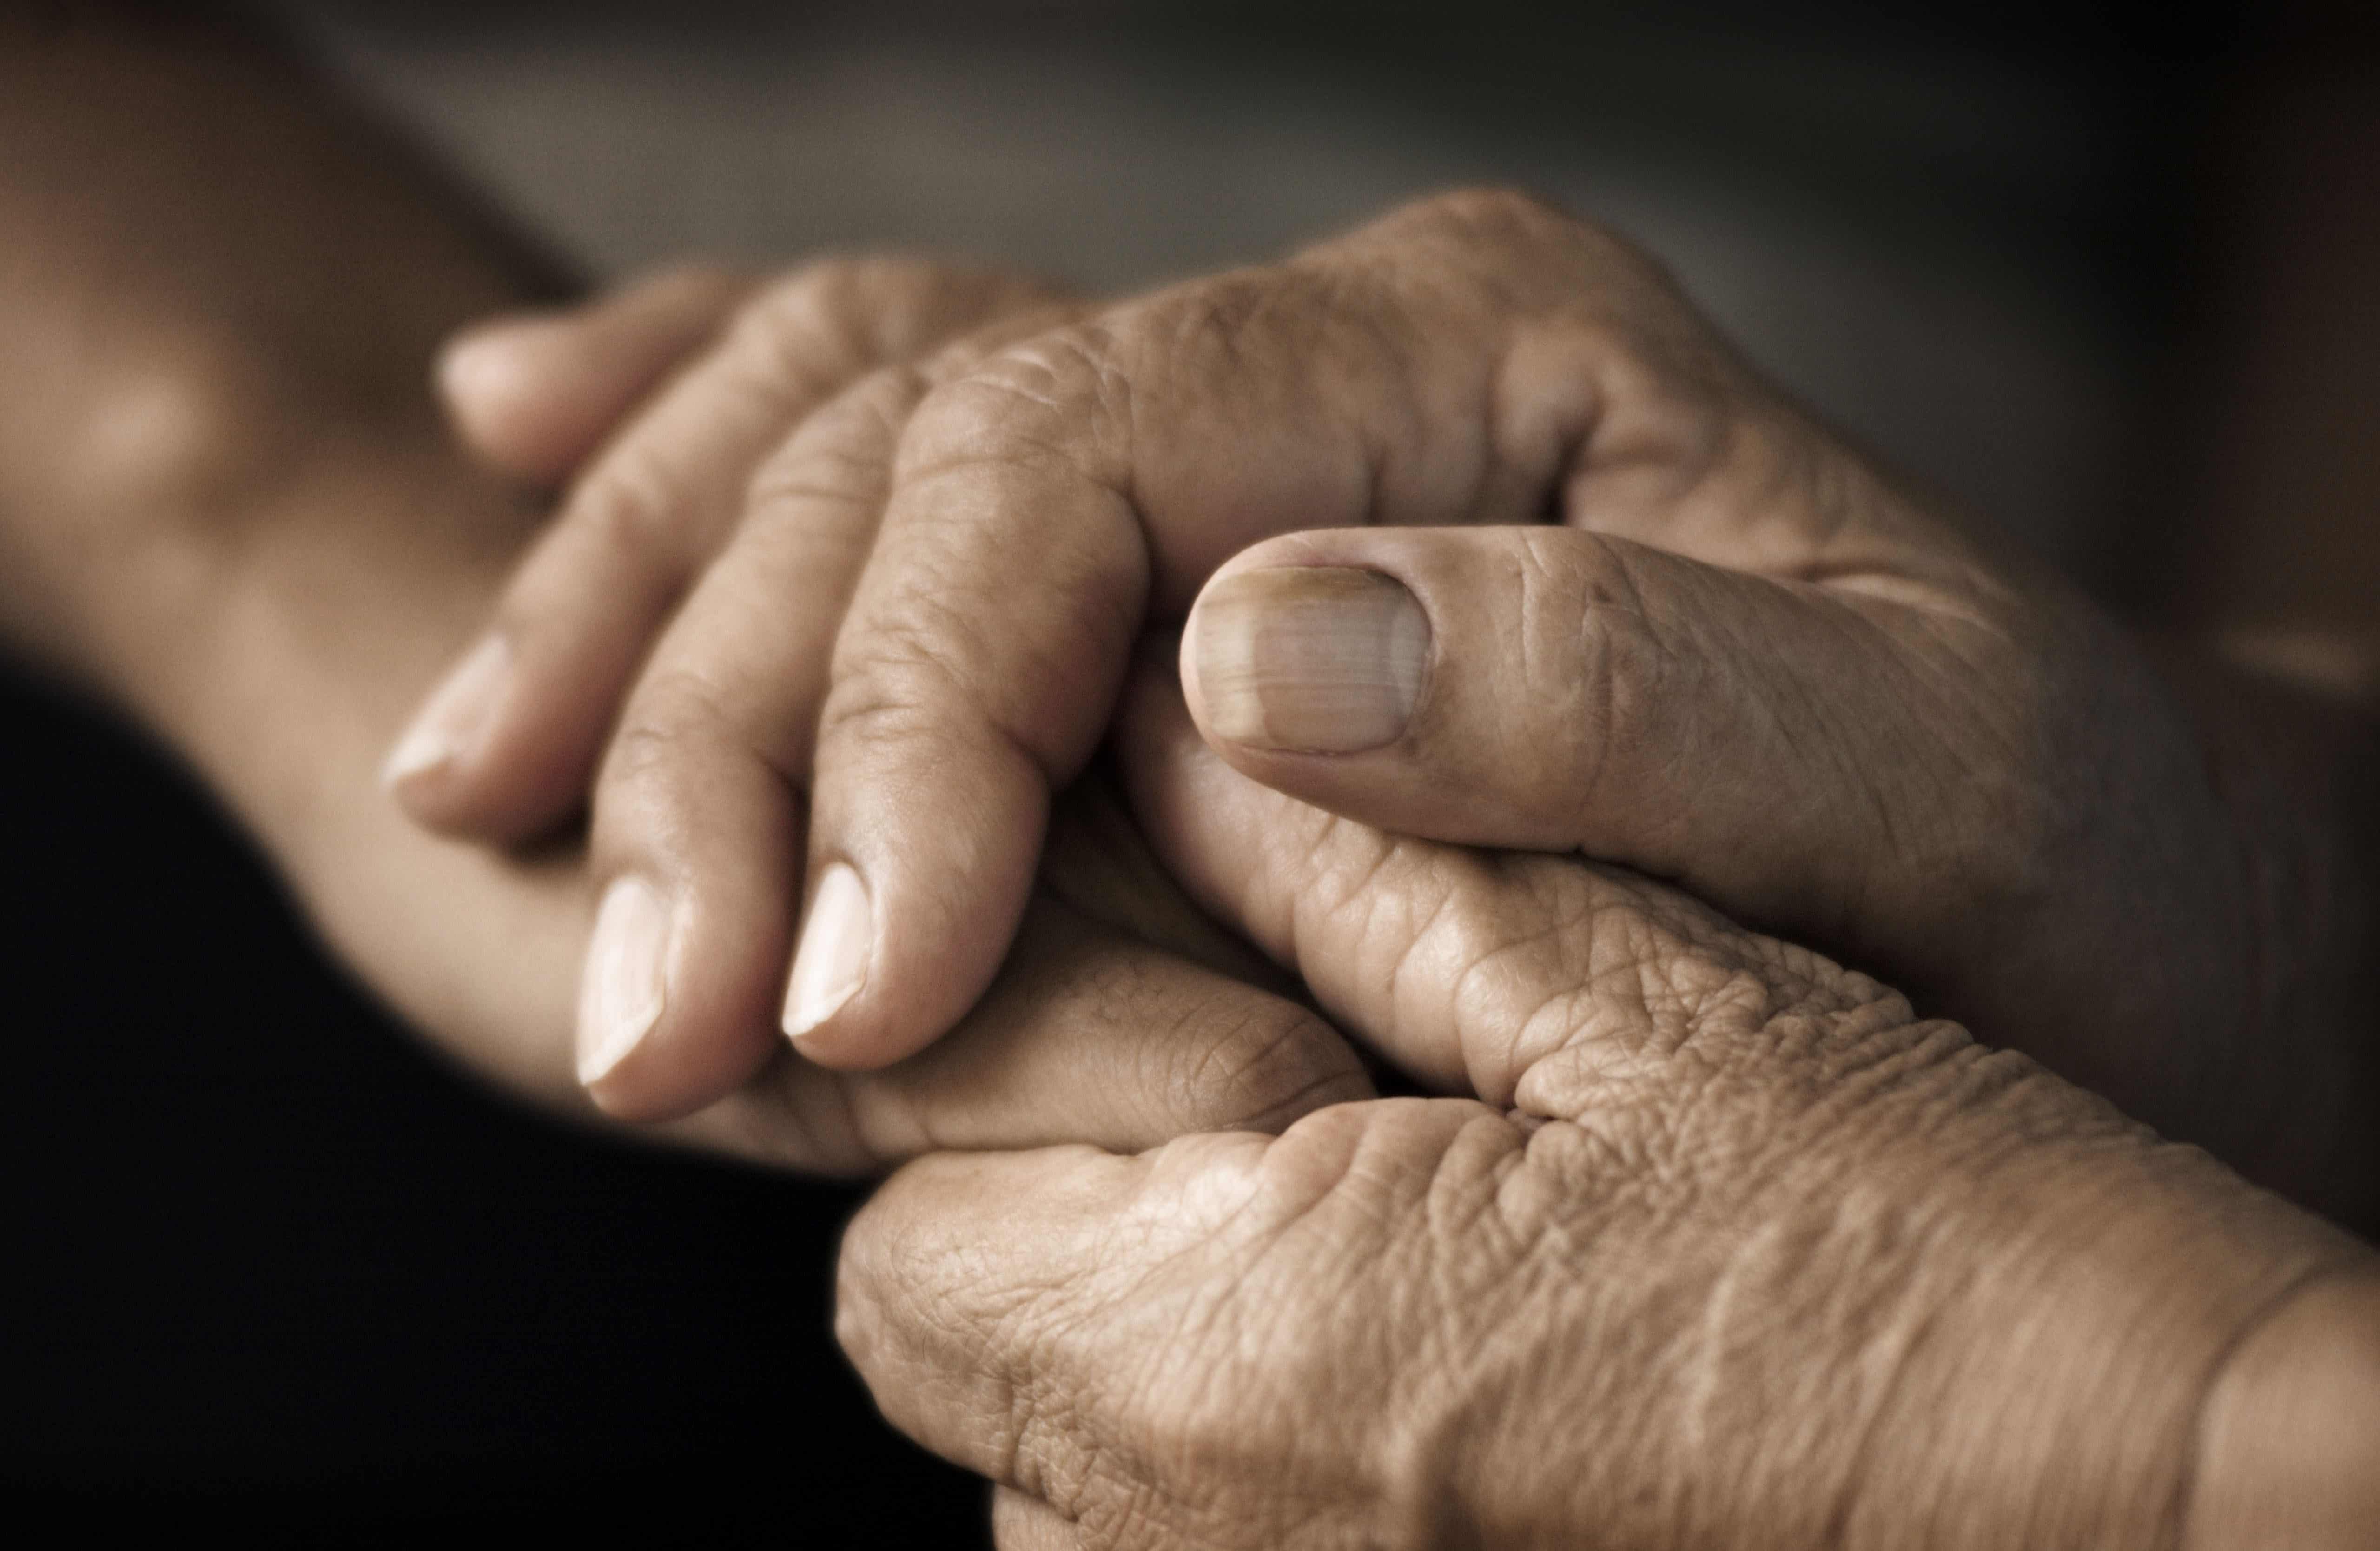 A photo of a paid of old hands, holding a younger person's hand